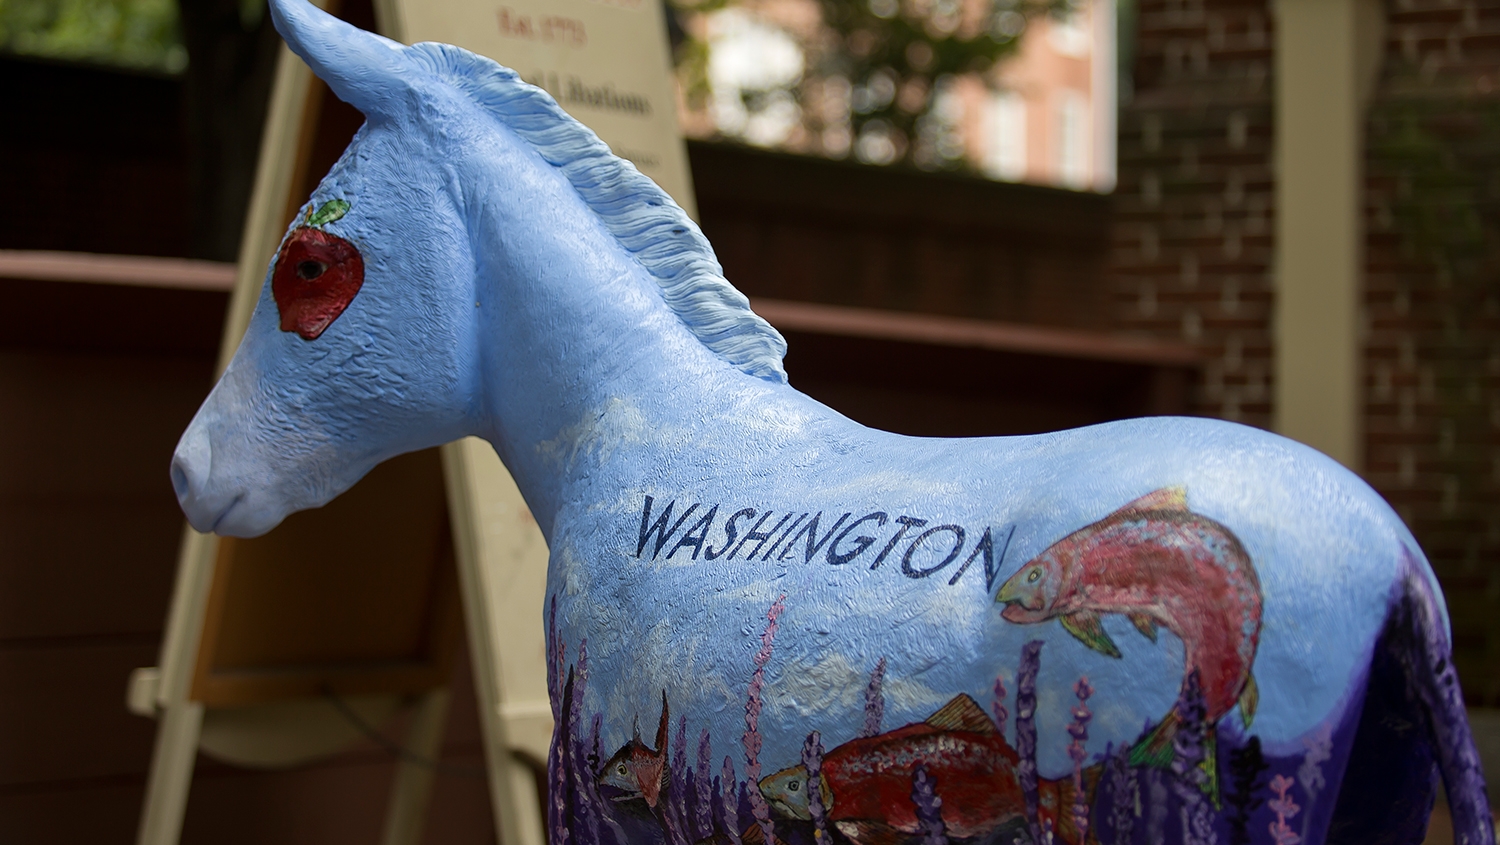 A donkey painted with visual elements representing Washington.